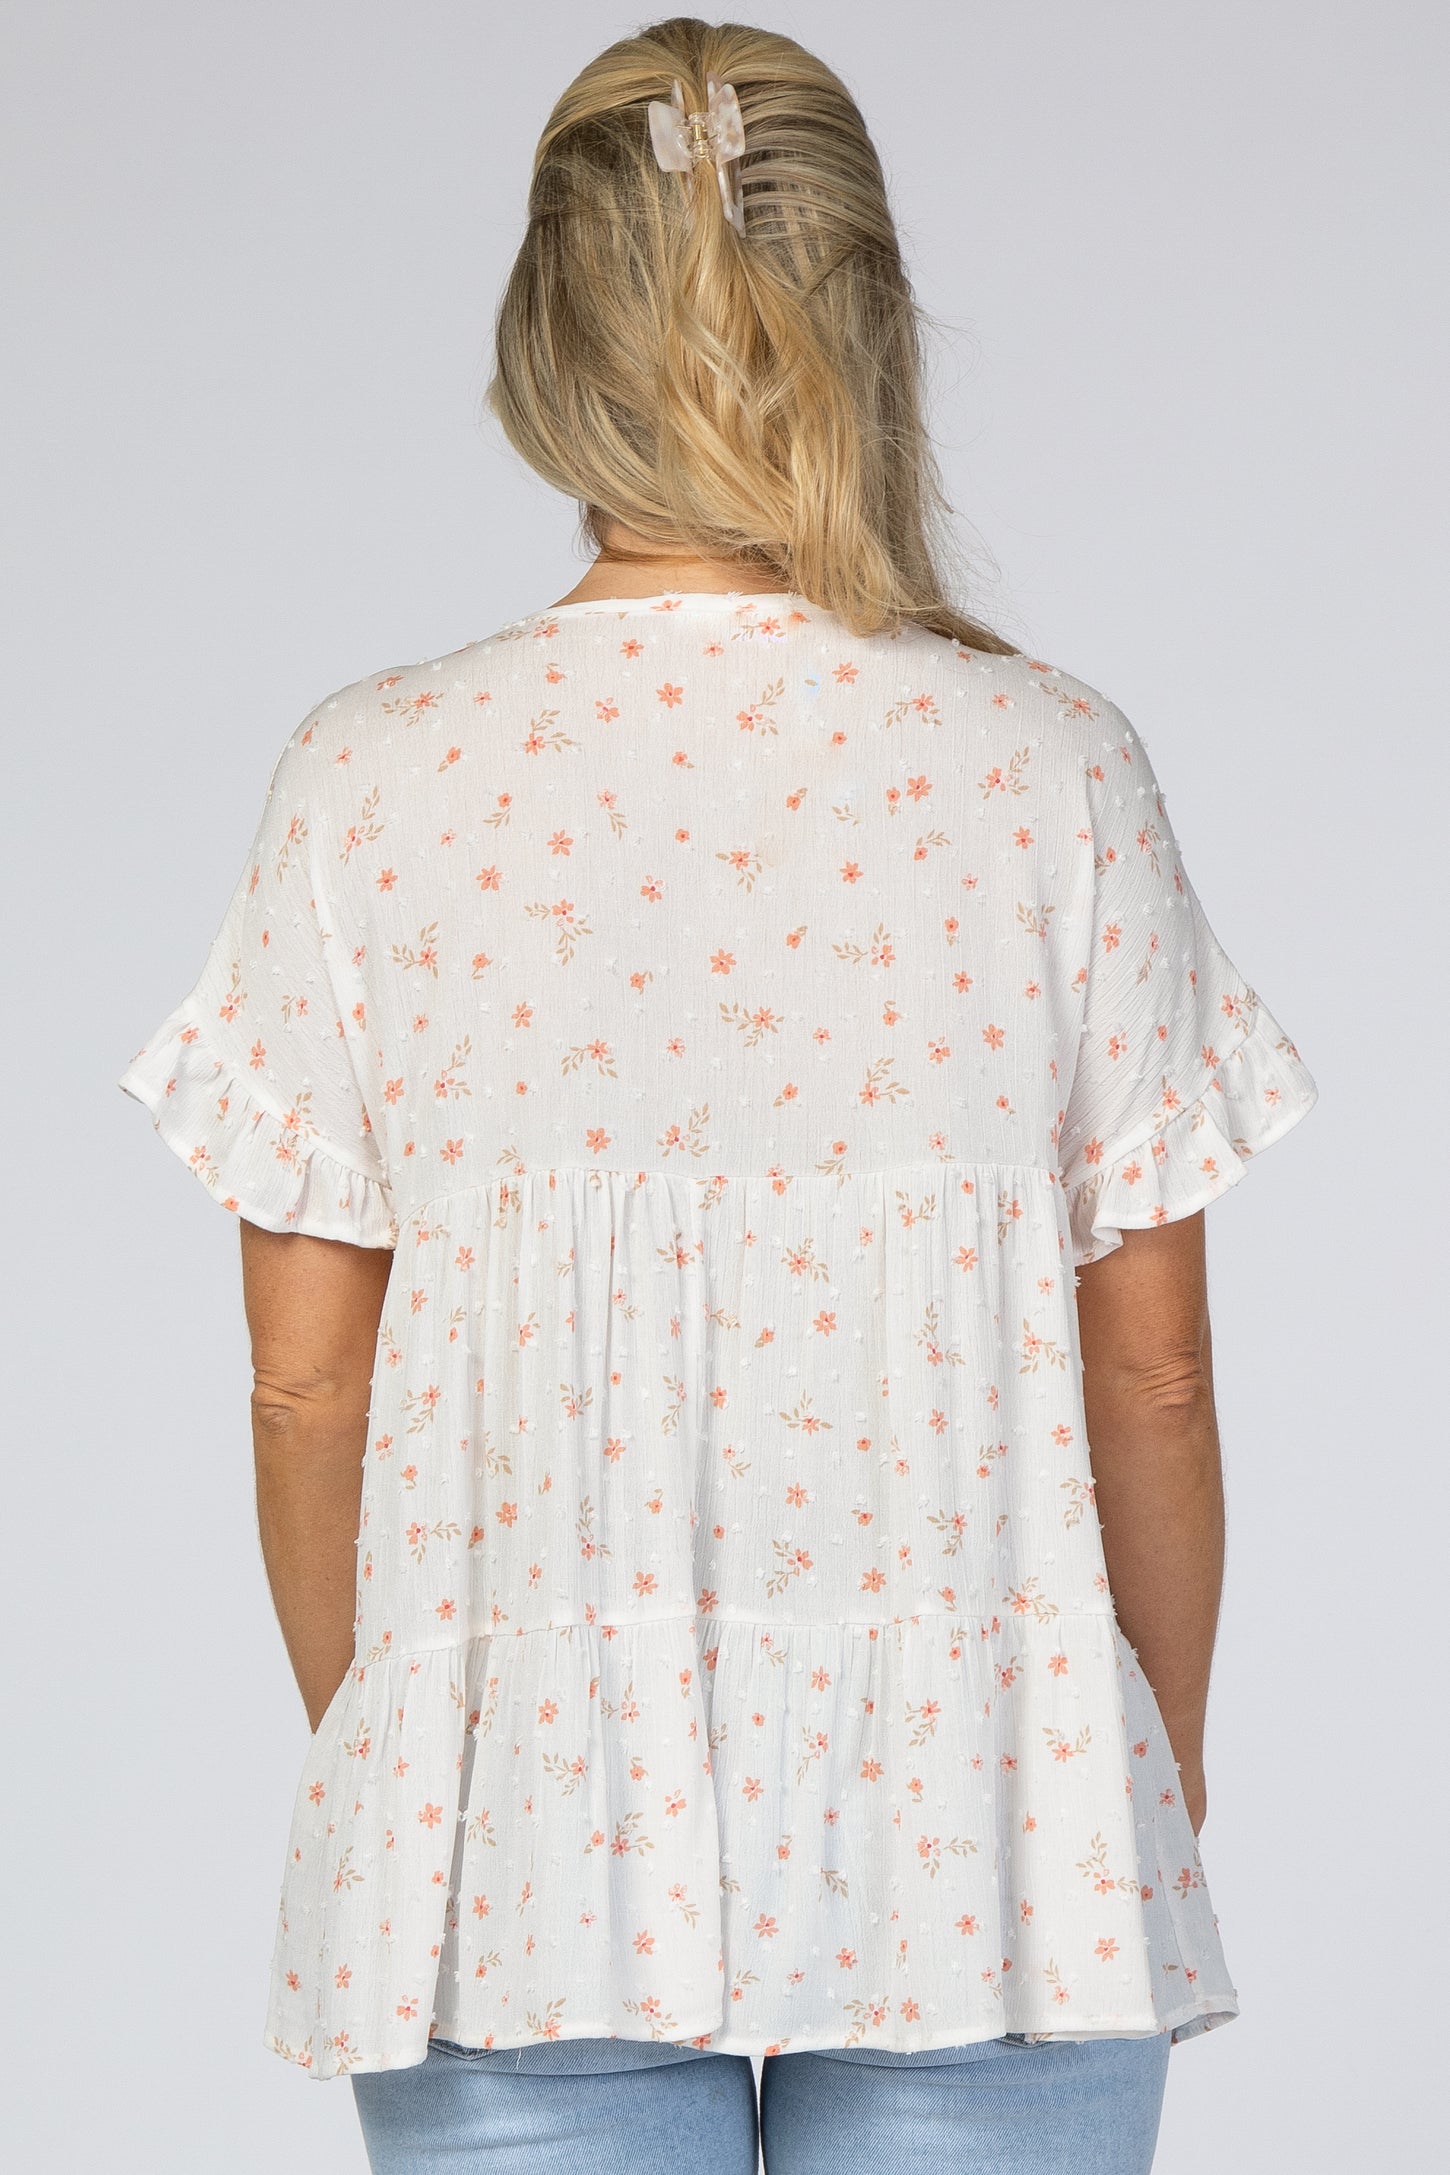 Ivory Floral Swiss Dot Tiered Maternity Top